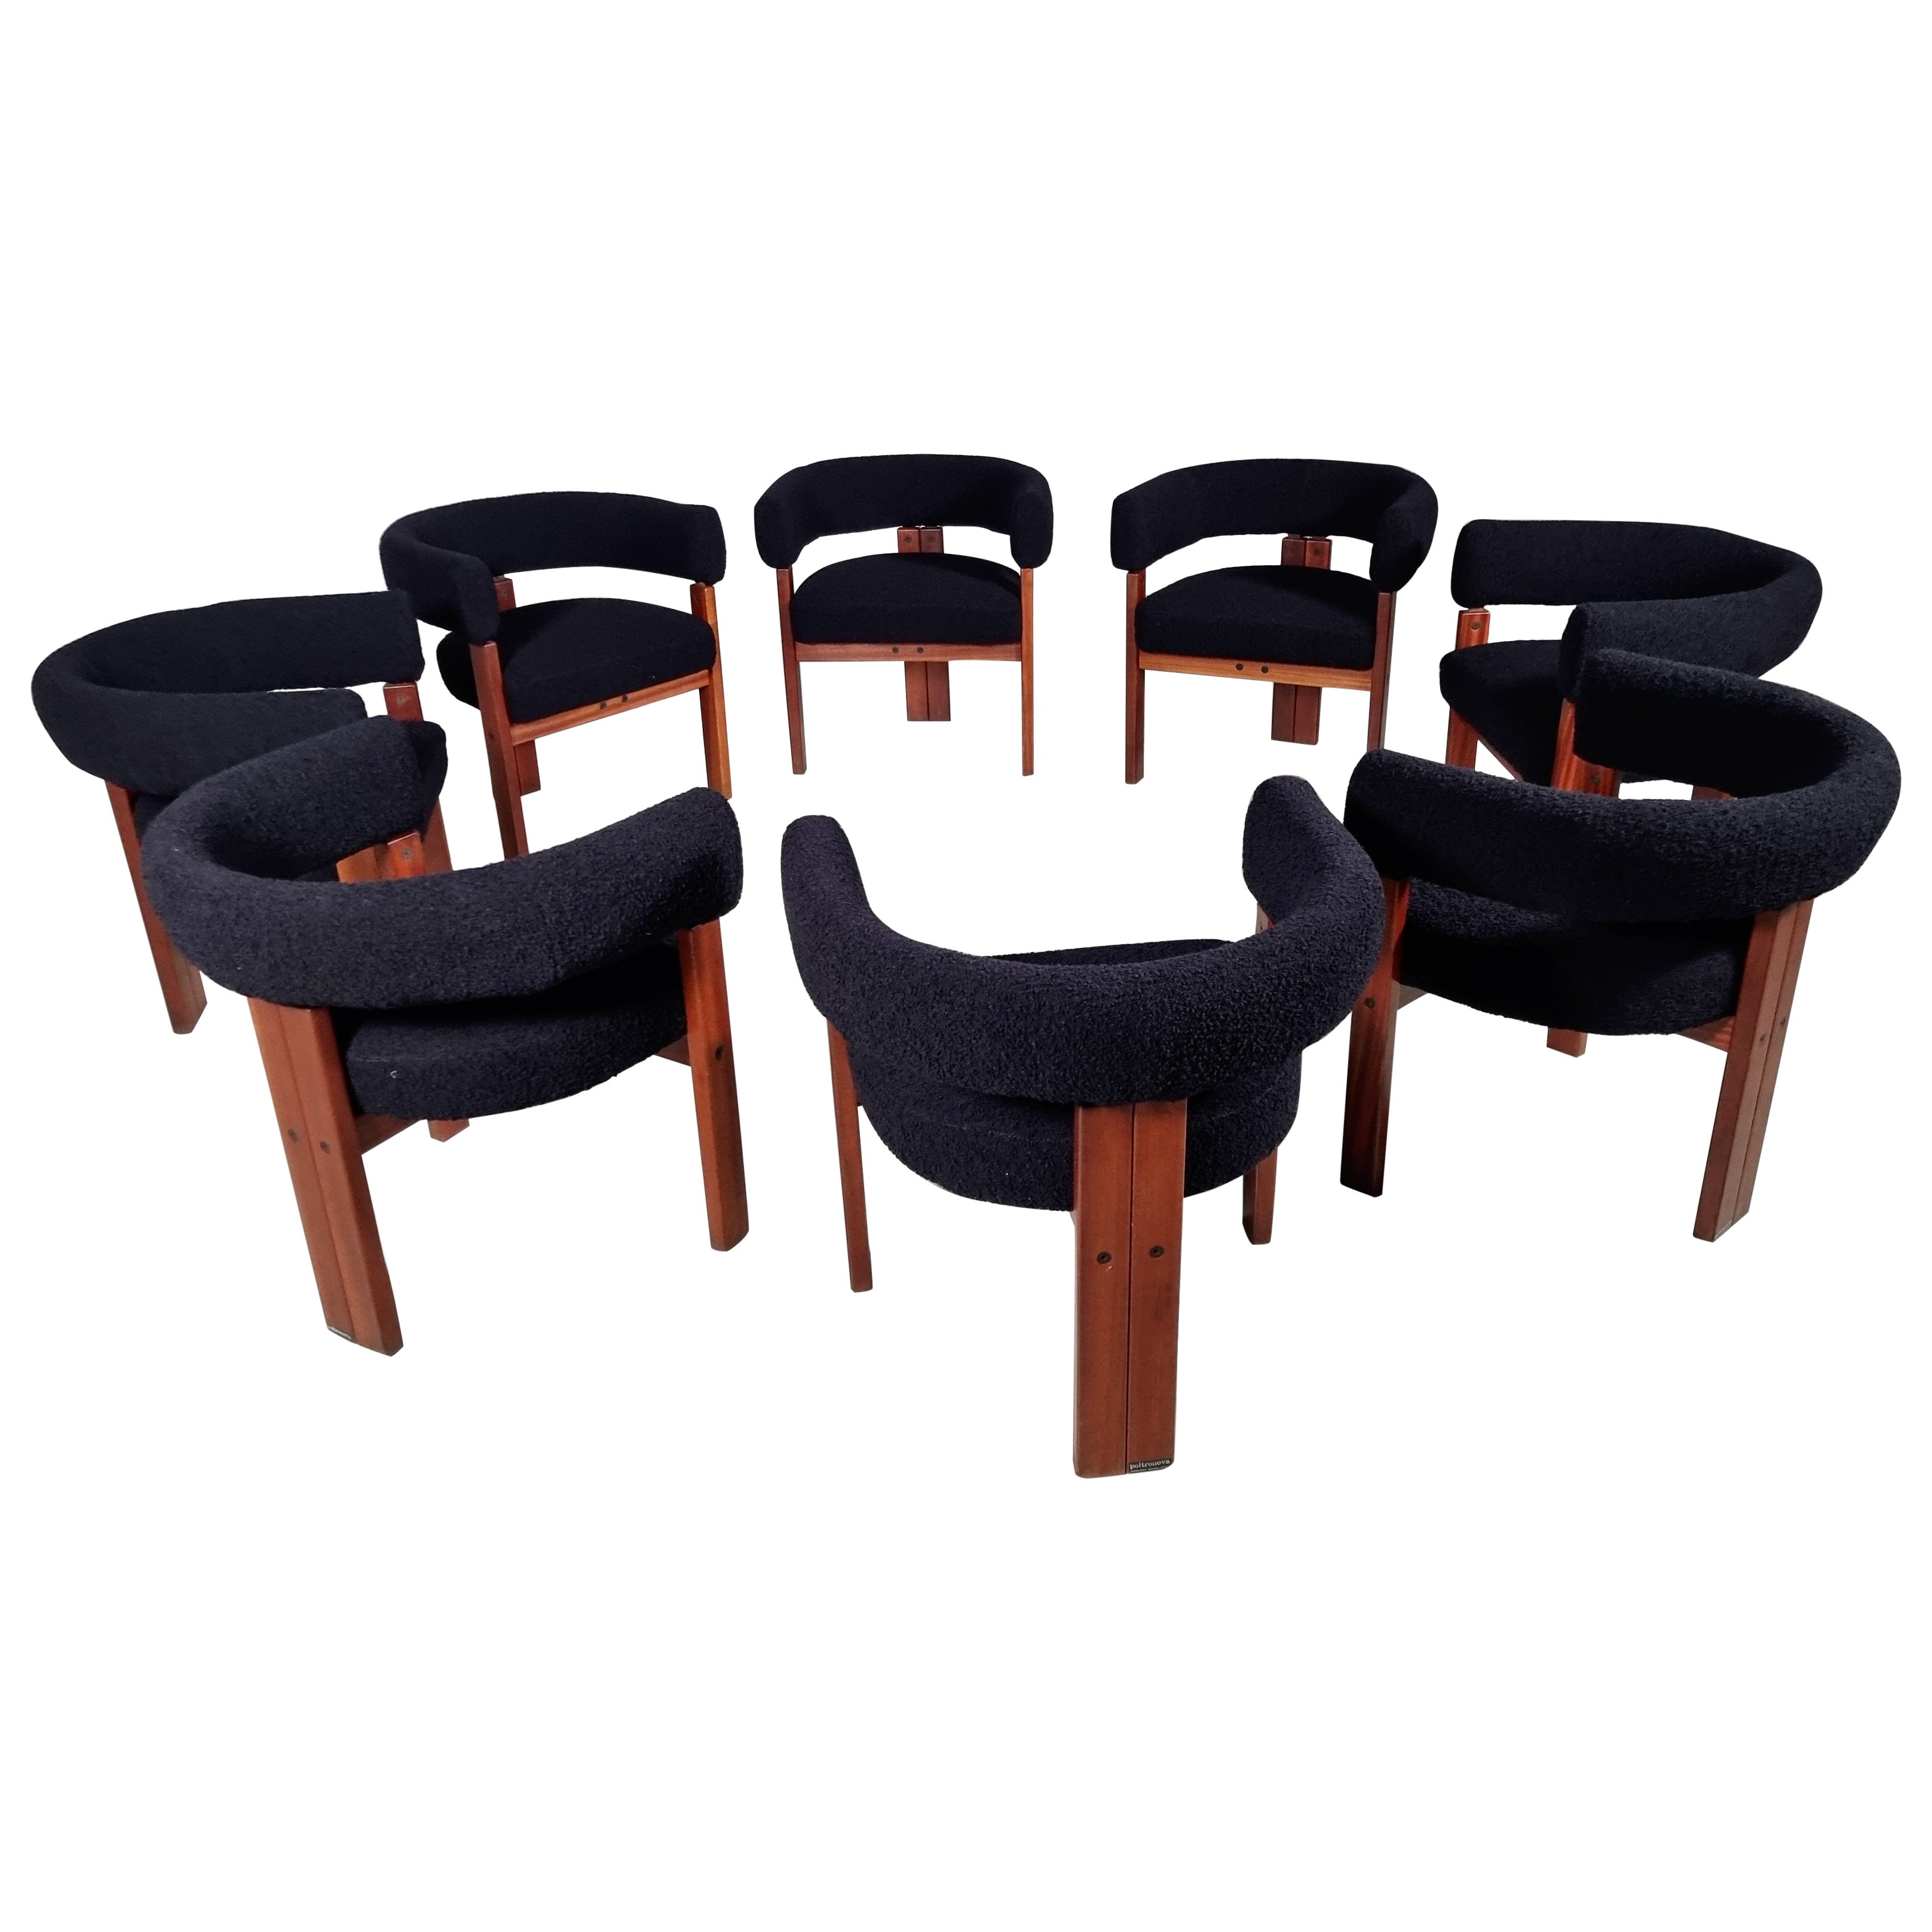 Set of 8 Chairs in teak and black boucle by Ettore Sottsass for Poltronova, 1960 For Sale